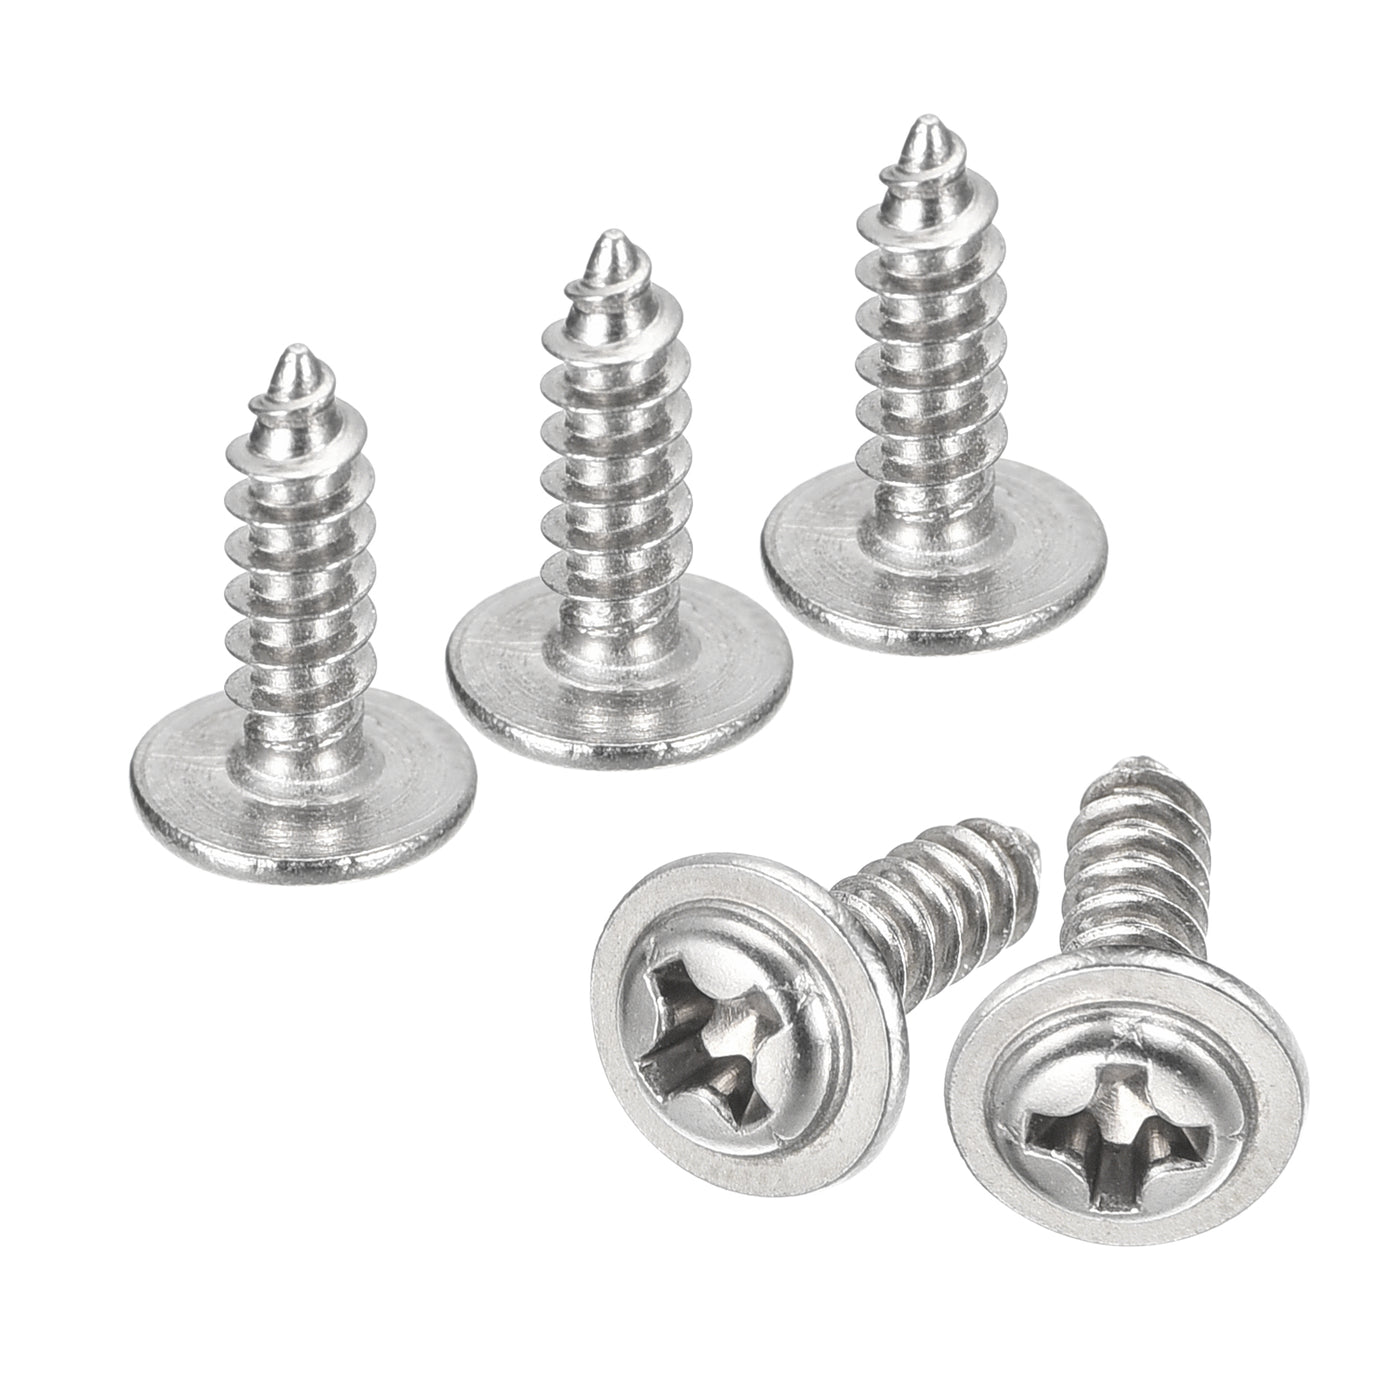 uxcell Uxcell ST3x10mm Phillips Pan Head Self-tapping Screw with Washer, 100pcs - 304 Stainless Steel Wood Screw Full Thread (Silver)